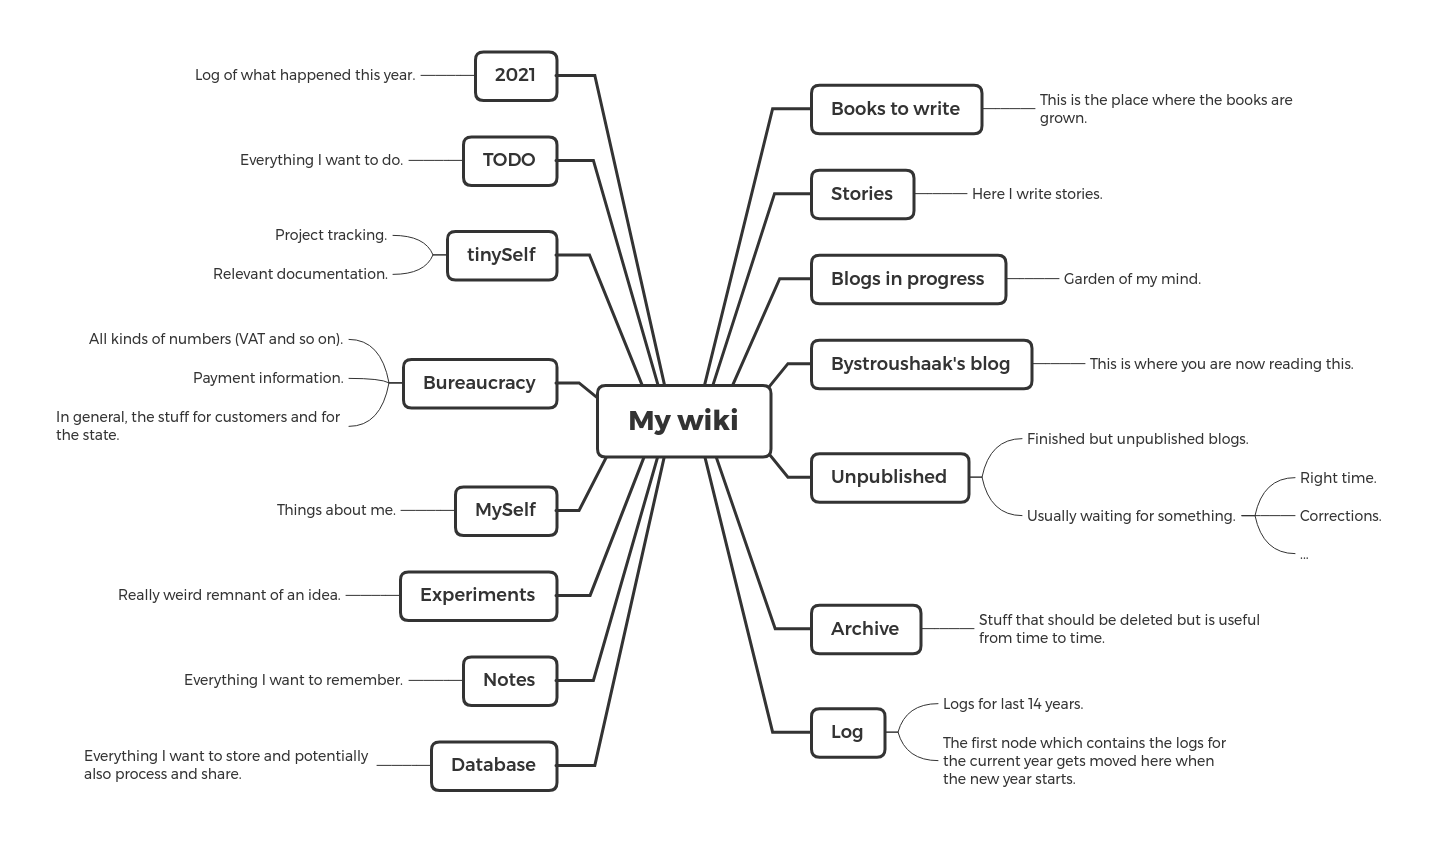 https://blog.rfox.eu/en/Organization_of_information/How_I_use_personal_wiki/my_wiki_overview.png